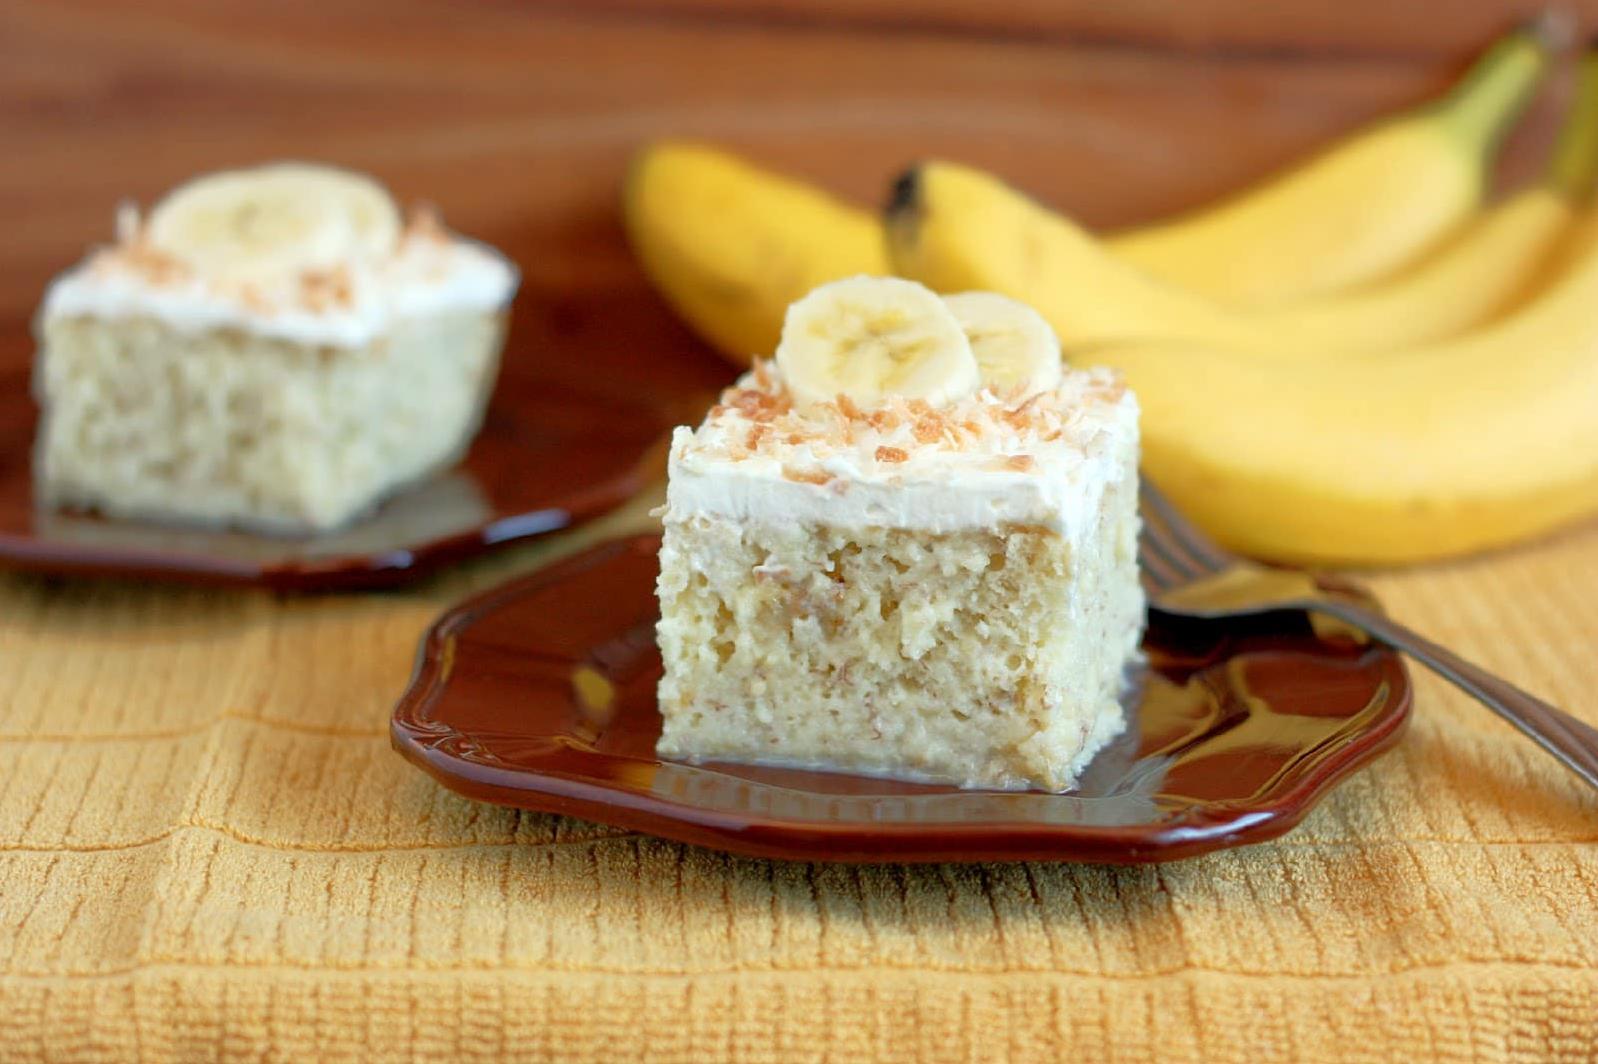  It's hard to resist the temptation of this delicious cake topped with whipped cream and fresh bananas.